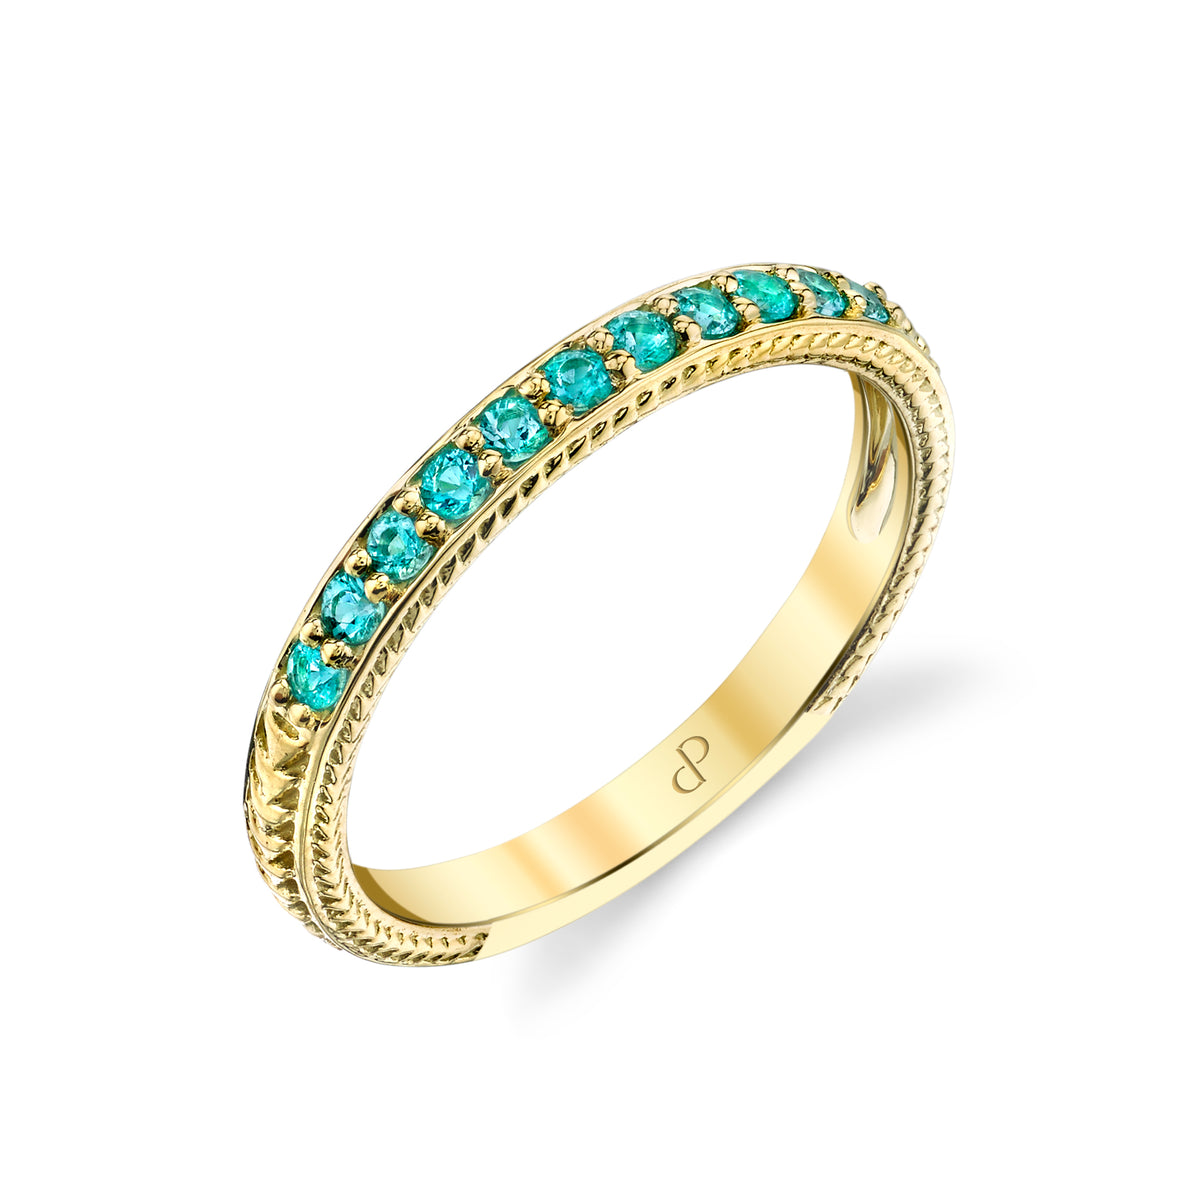 Buy 18KT Yellow Gold Enchanted Wildflower Diamond Finger Ring at Best Price